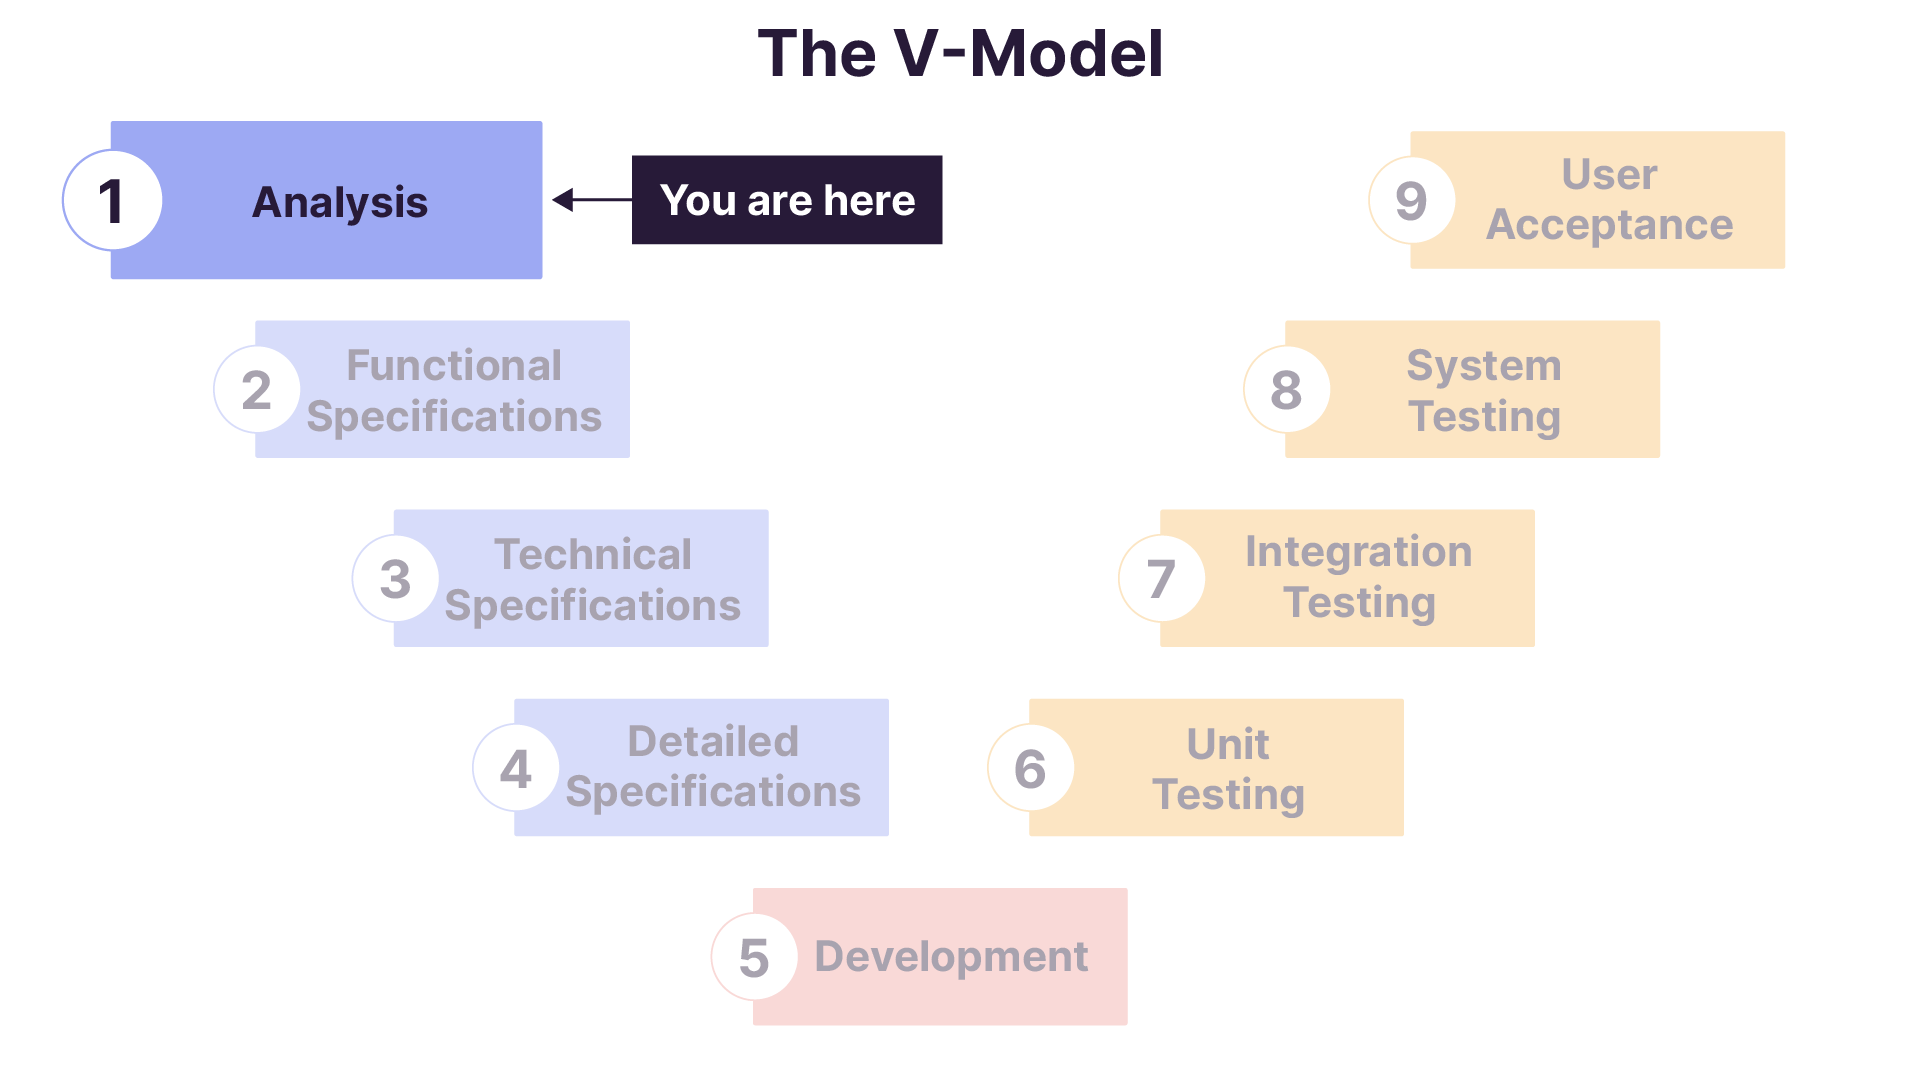 The First Step in the V-Model Process: Analysis